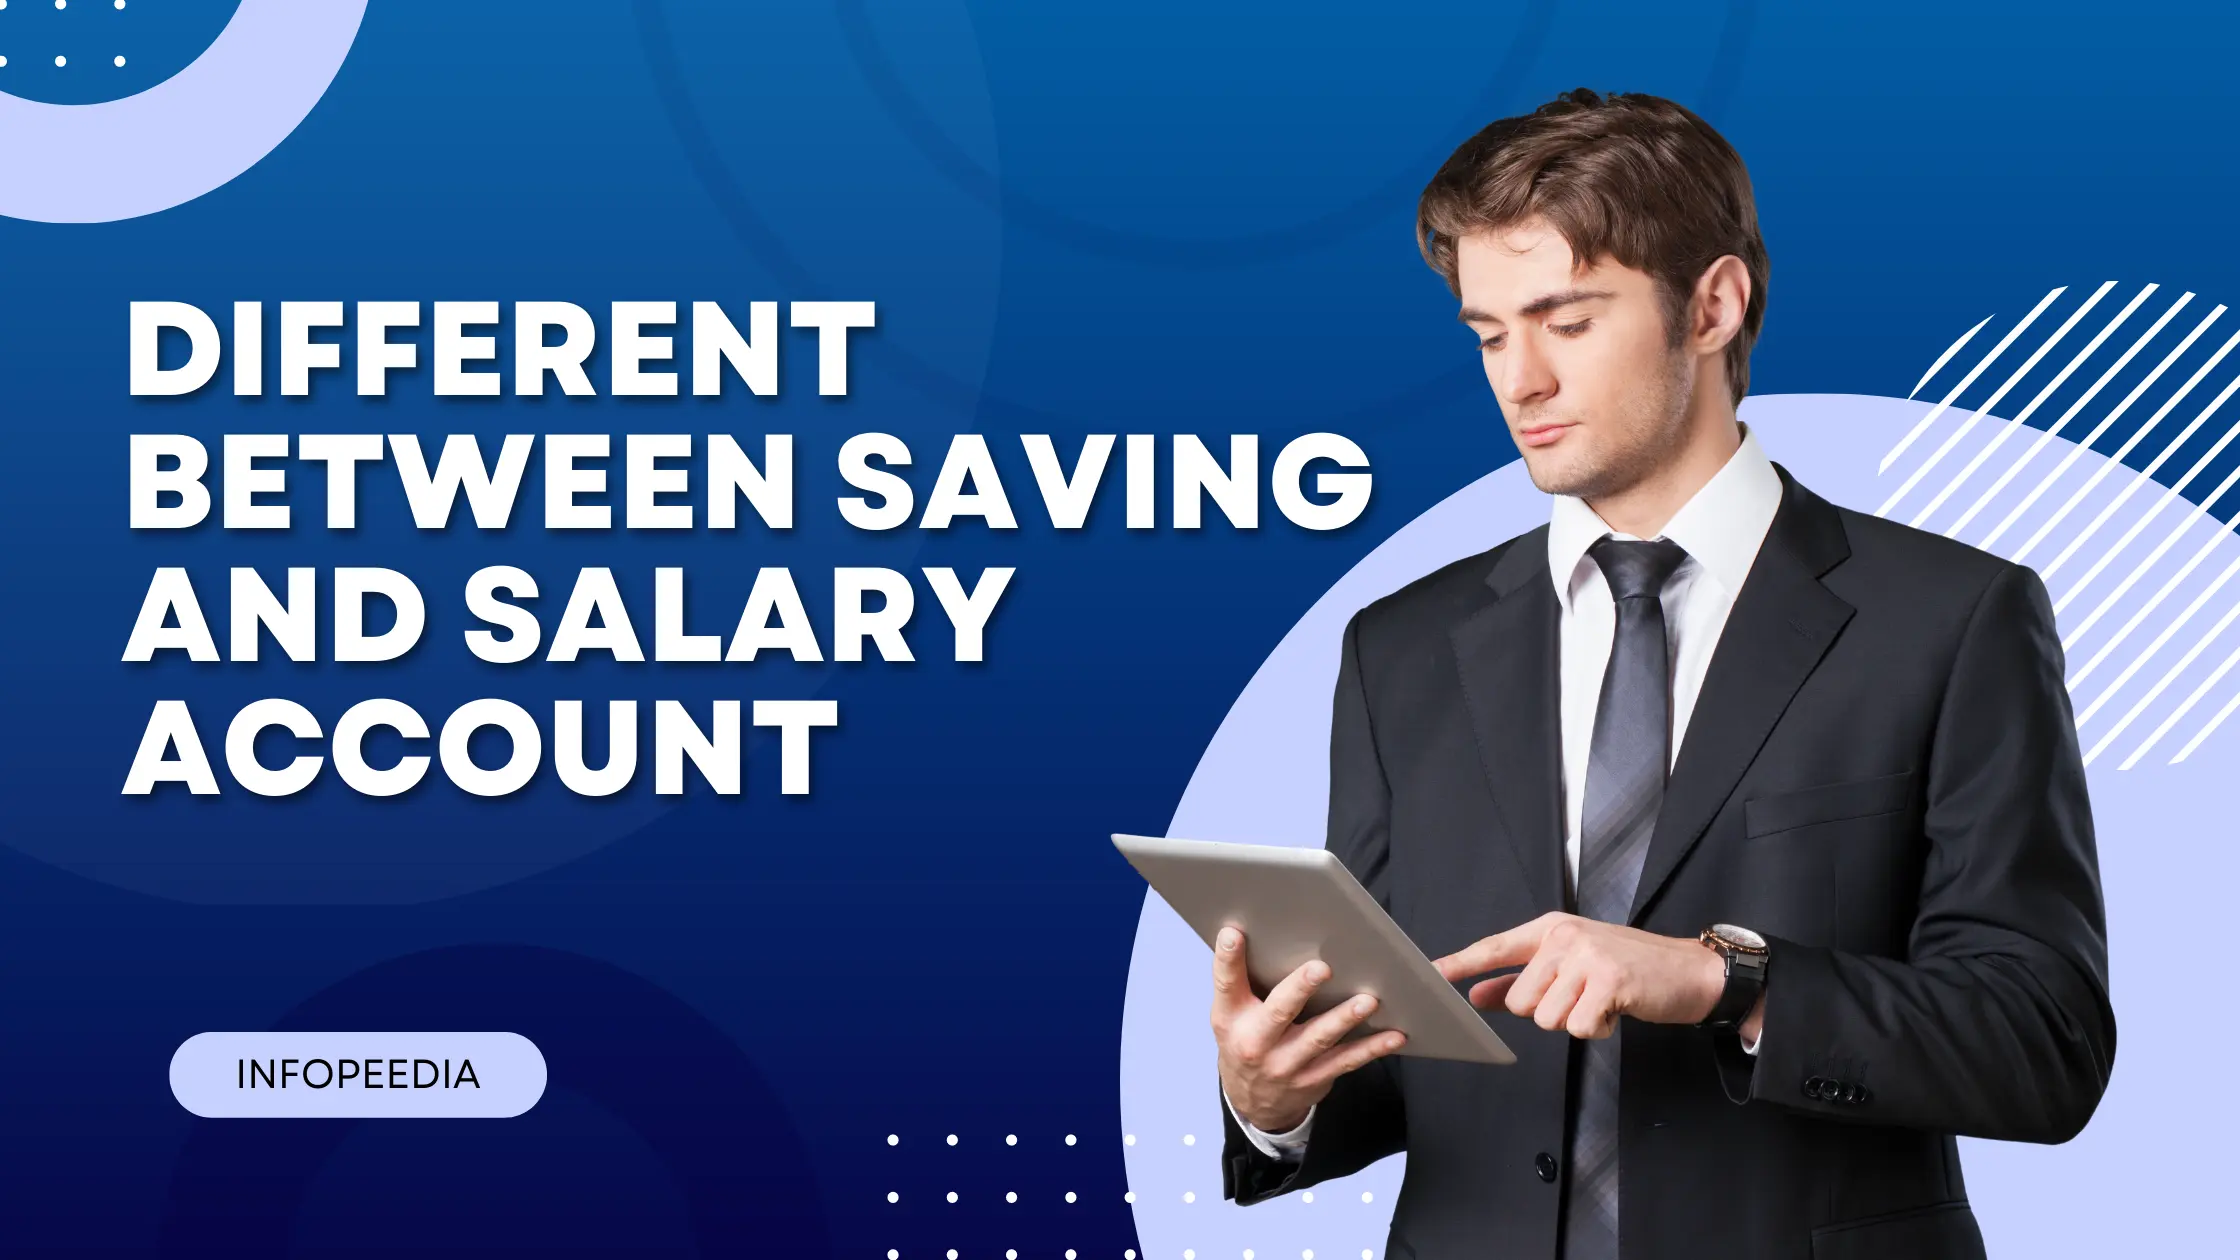 Different between saving and salary account